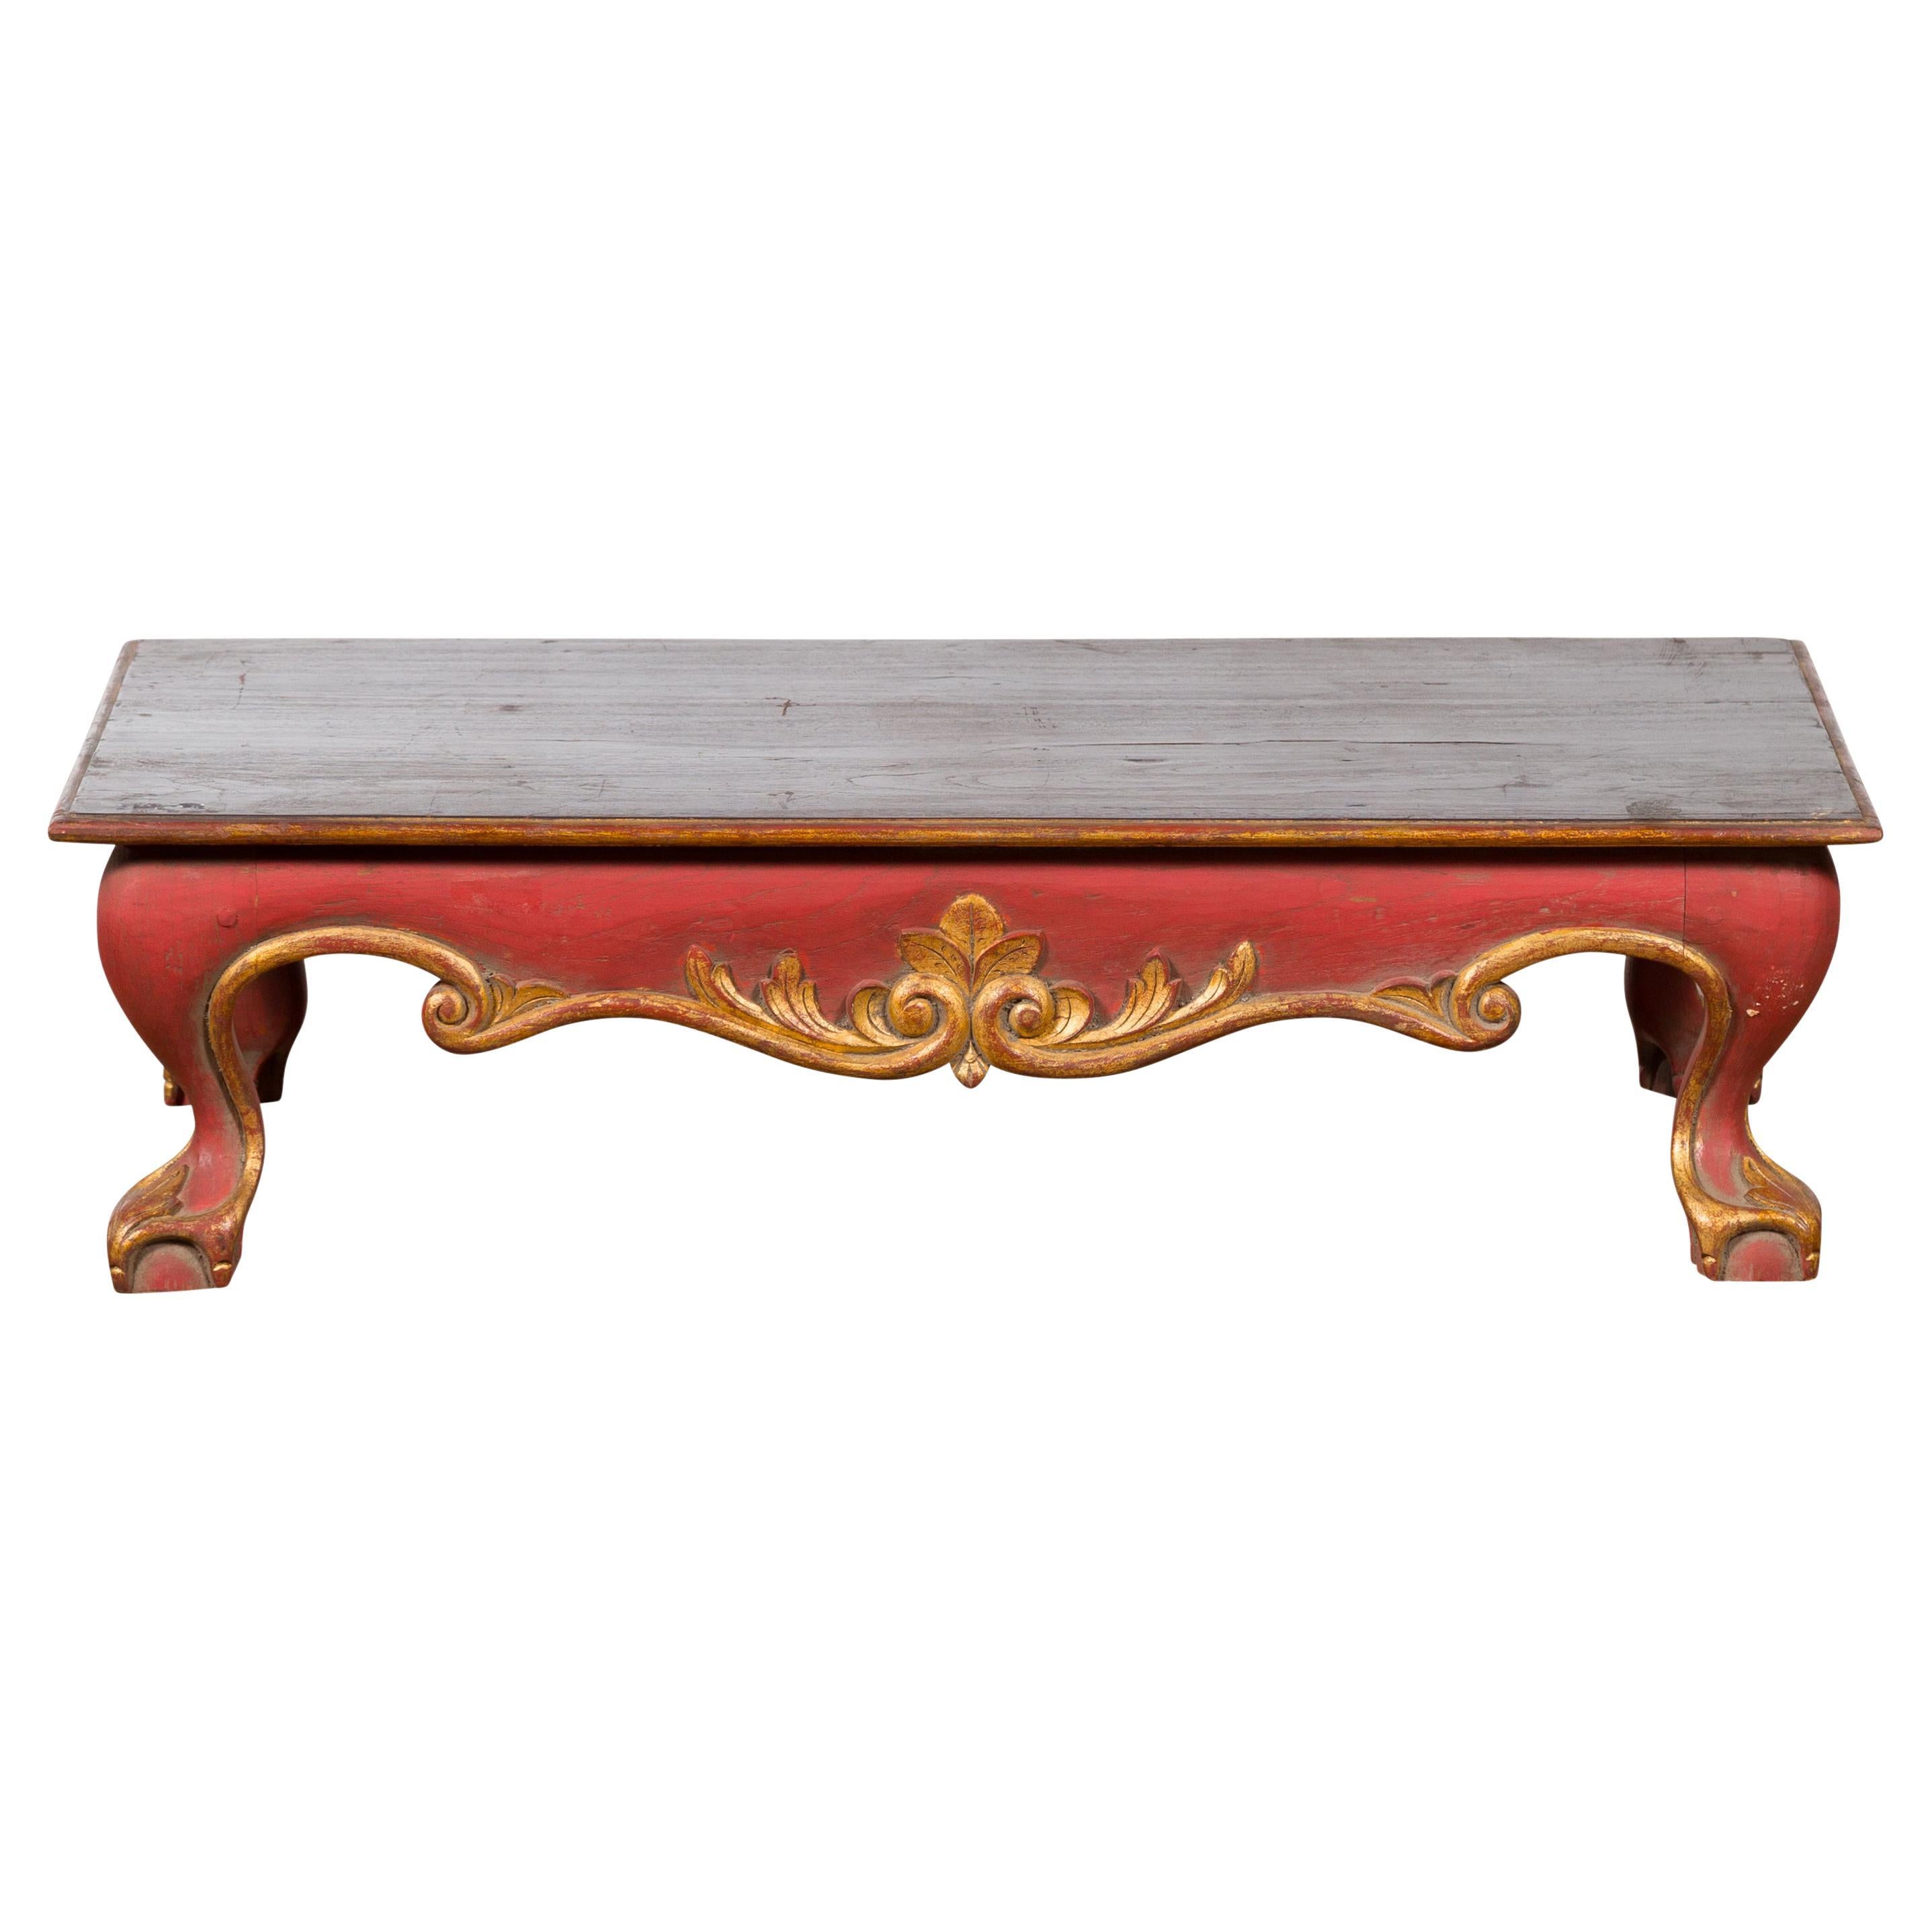 Indonesian Vintage Rococo Style Red and Gold Low Table with Ball-and-claw Feet For Sale